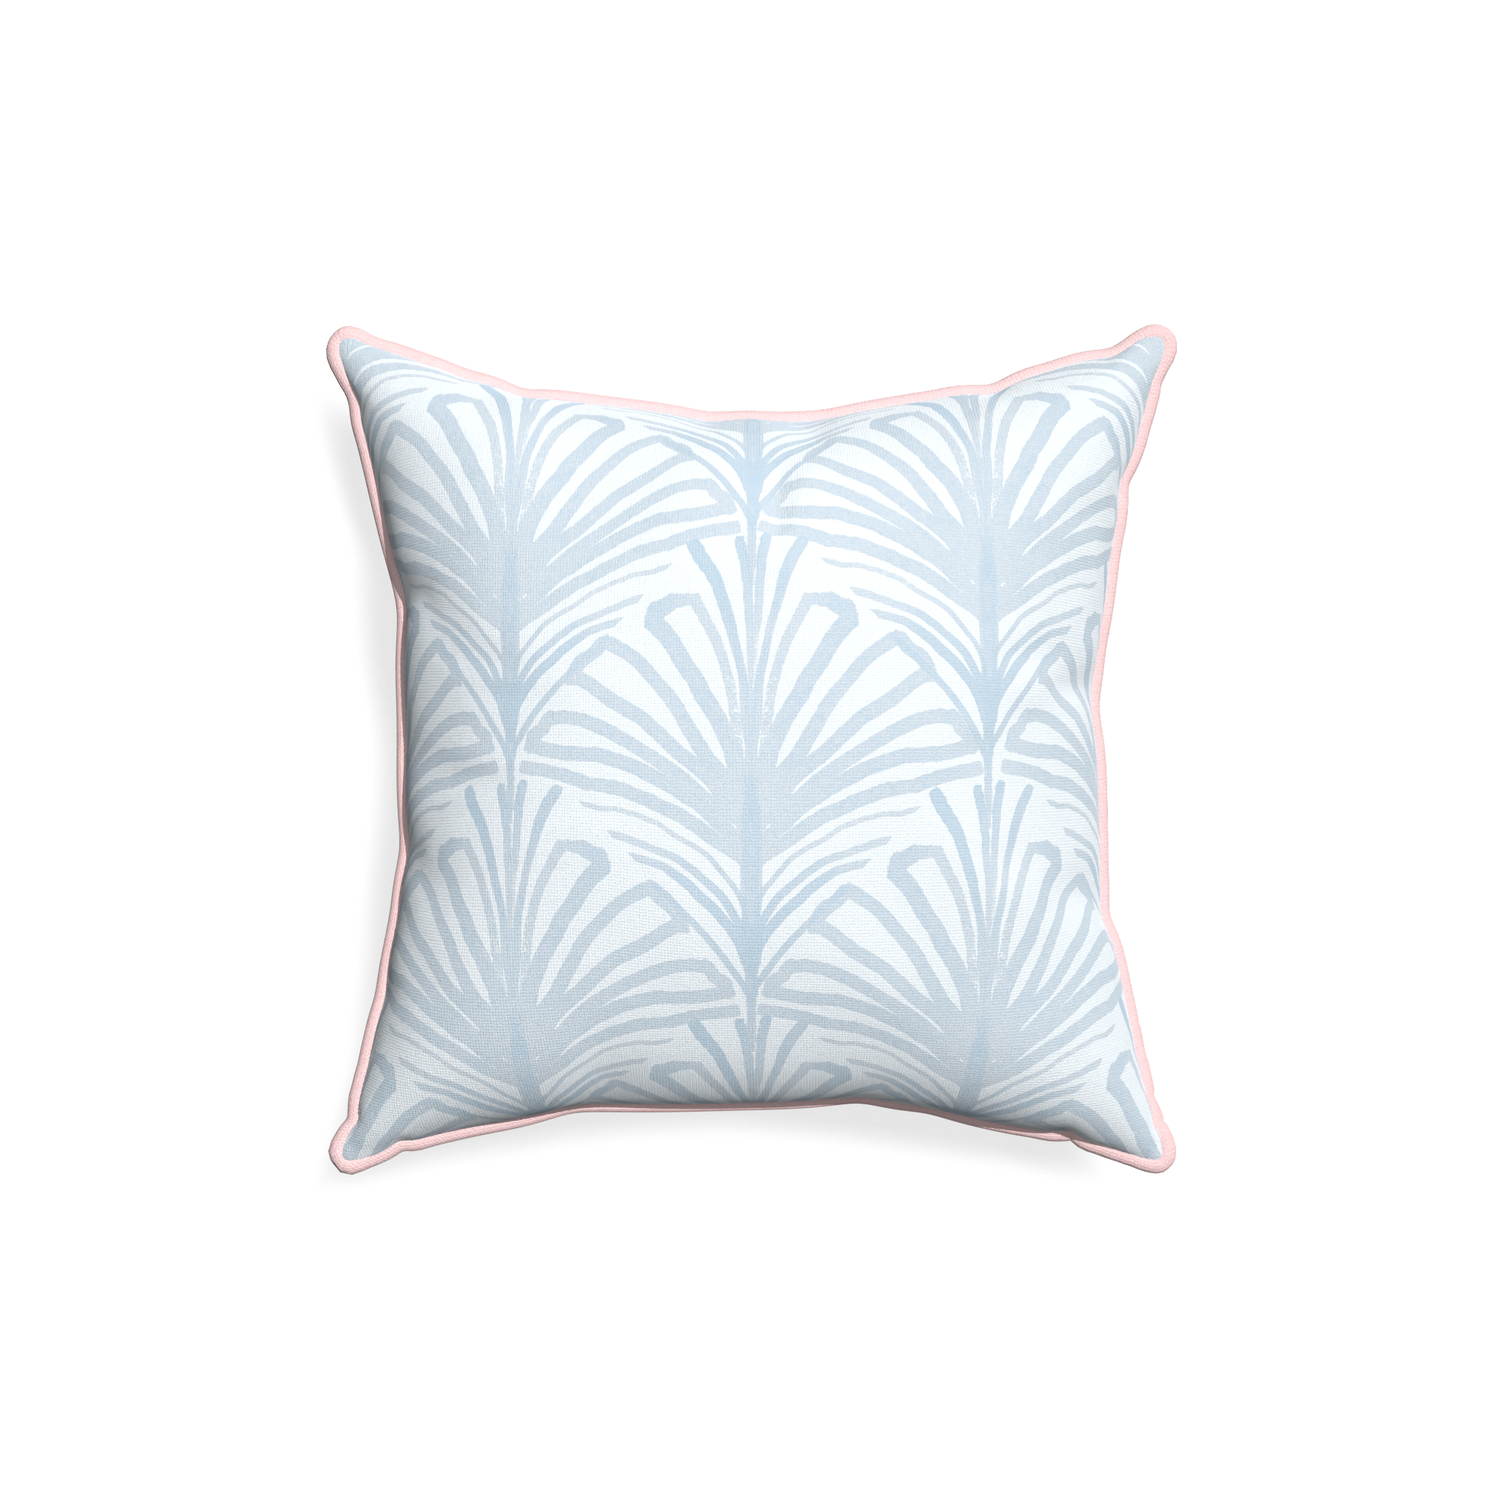 18-square suzy sky custom pillow with petal piping on white background